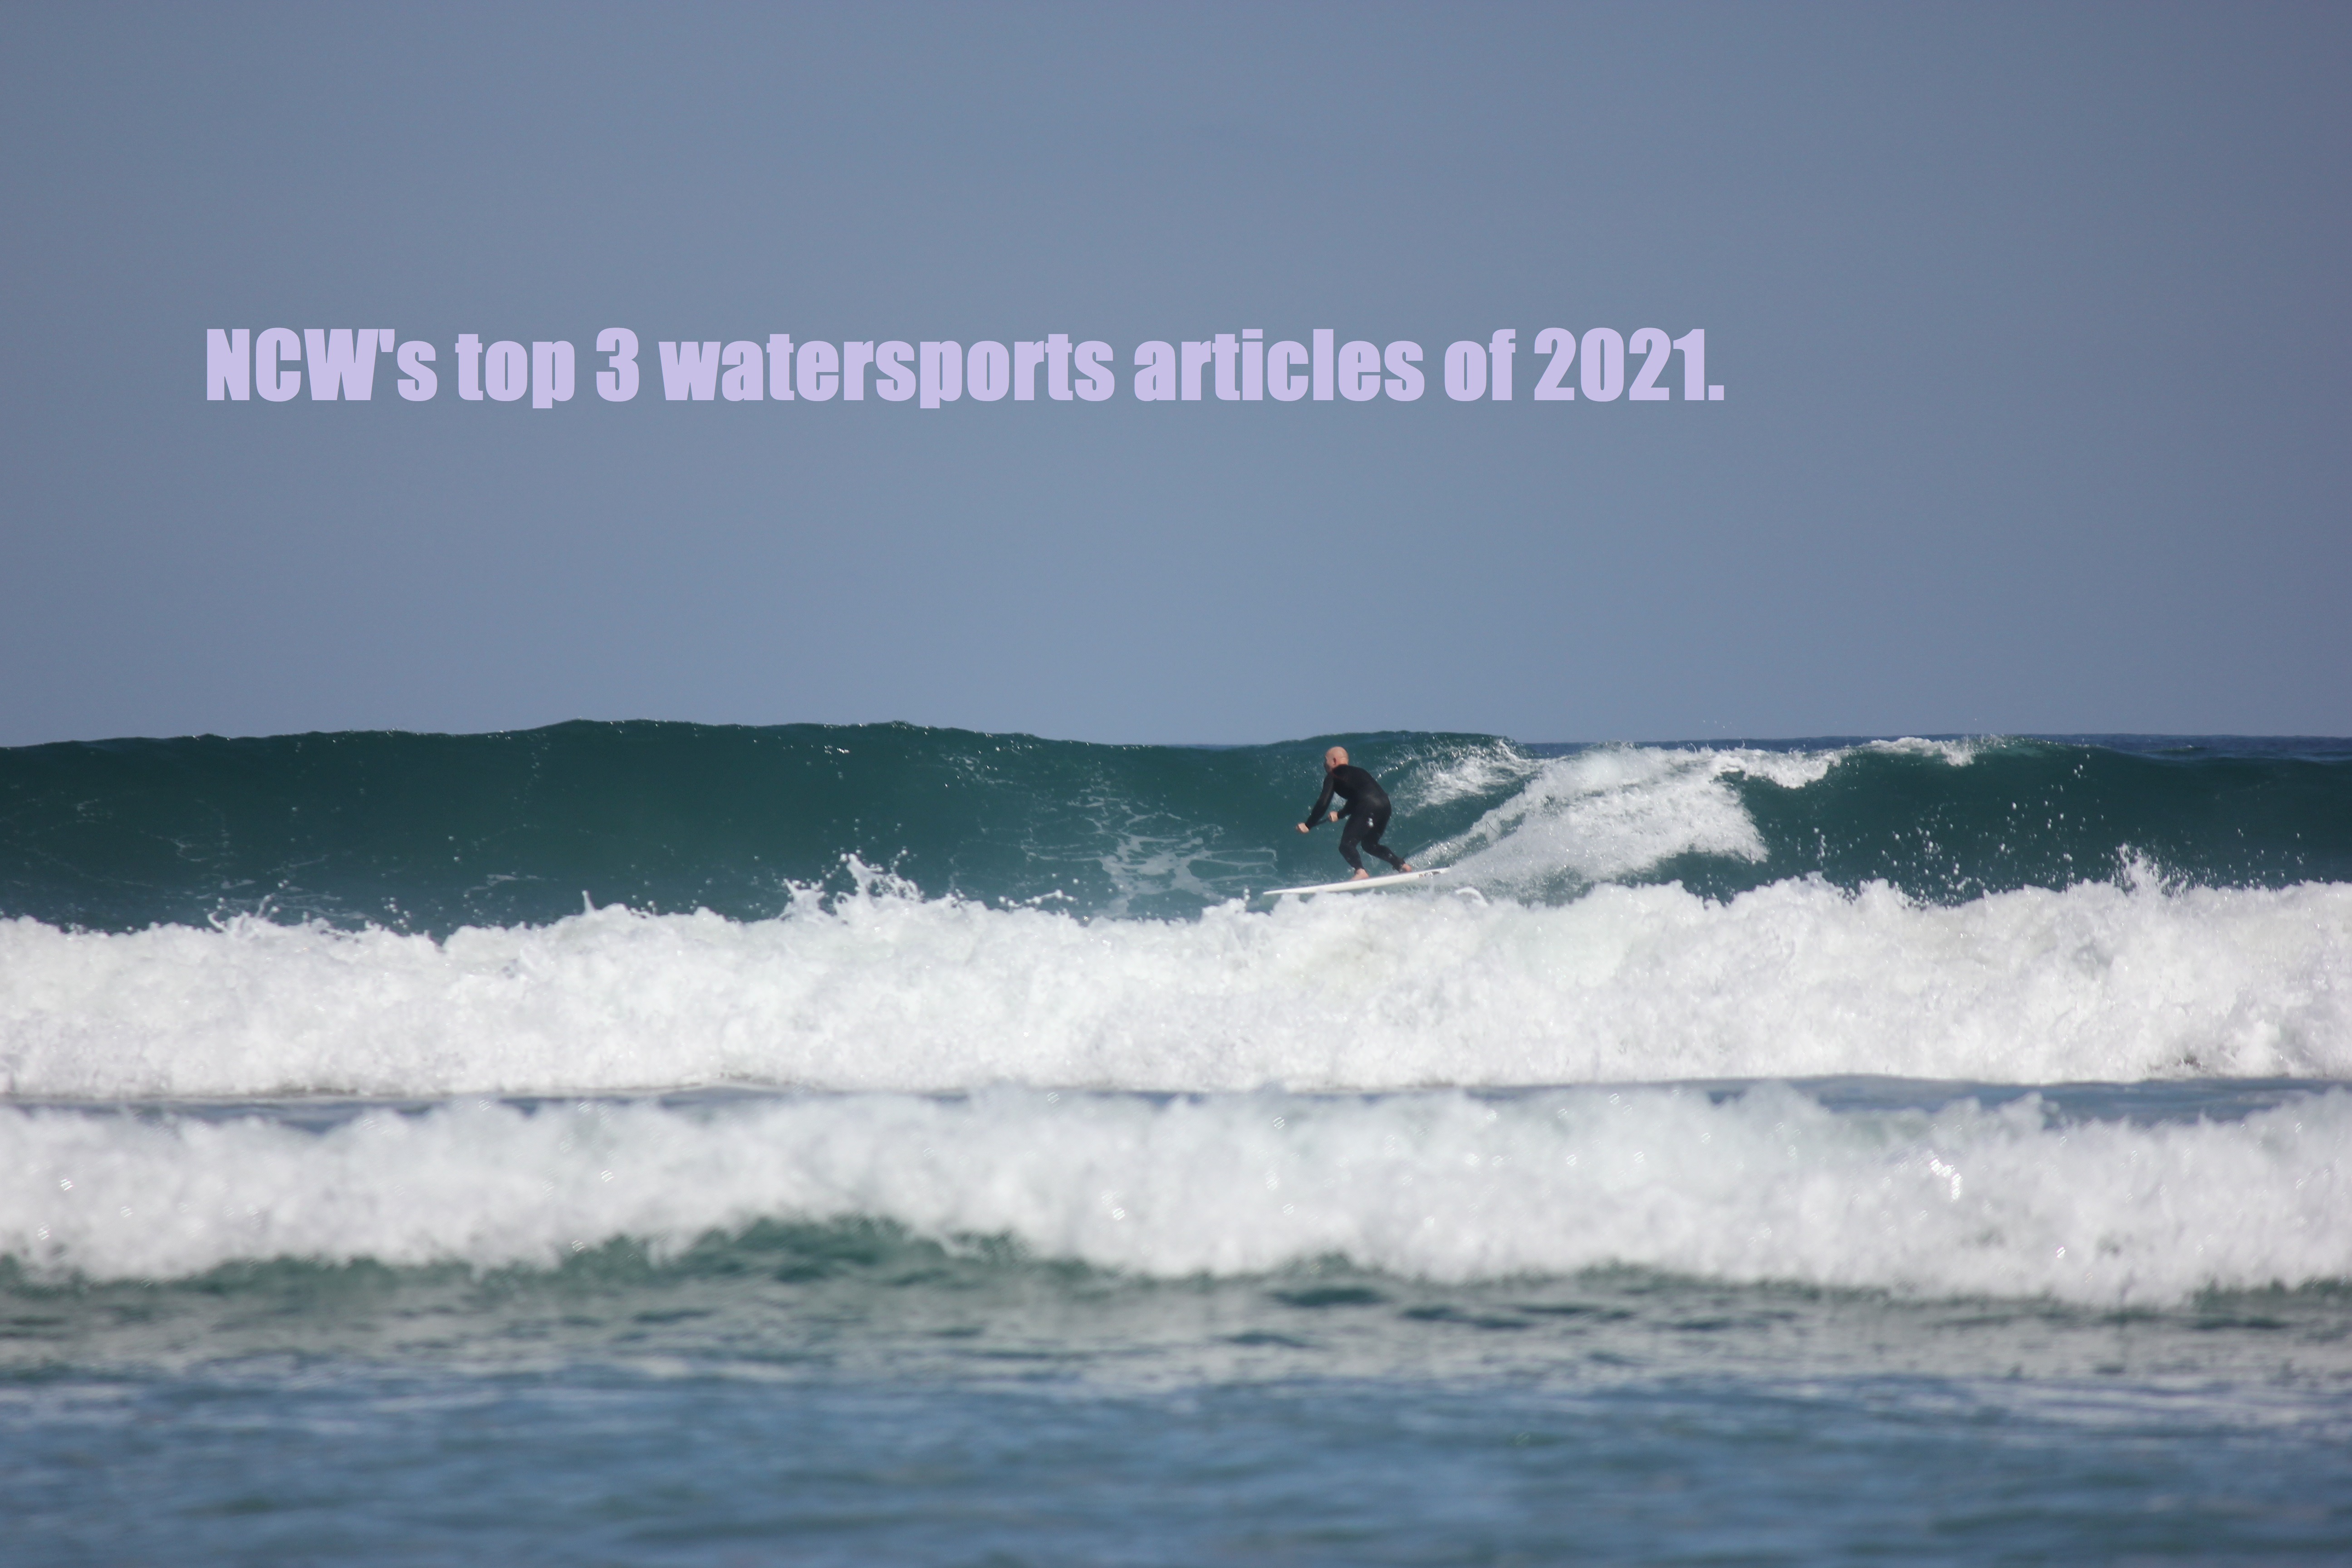 NCW's top 3 watersports articles of 2021.